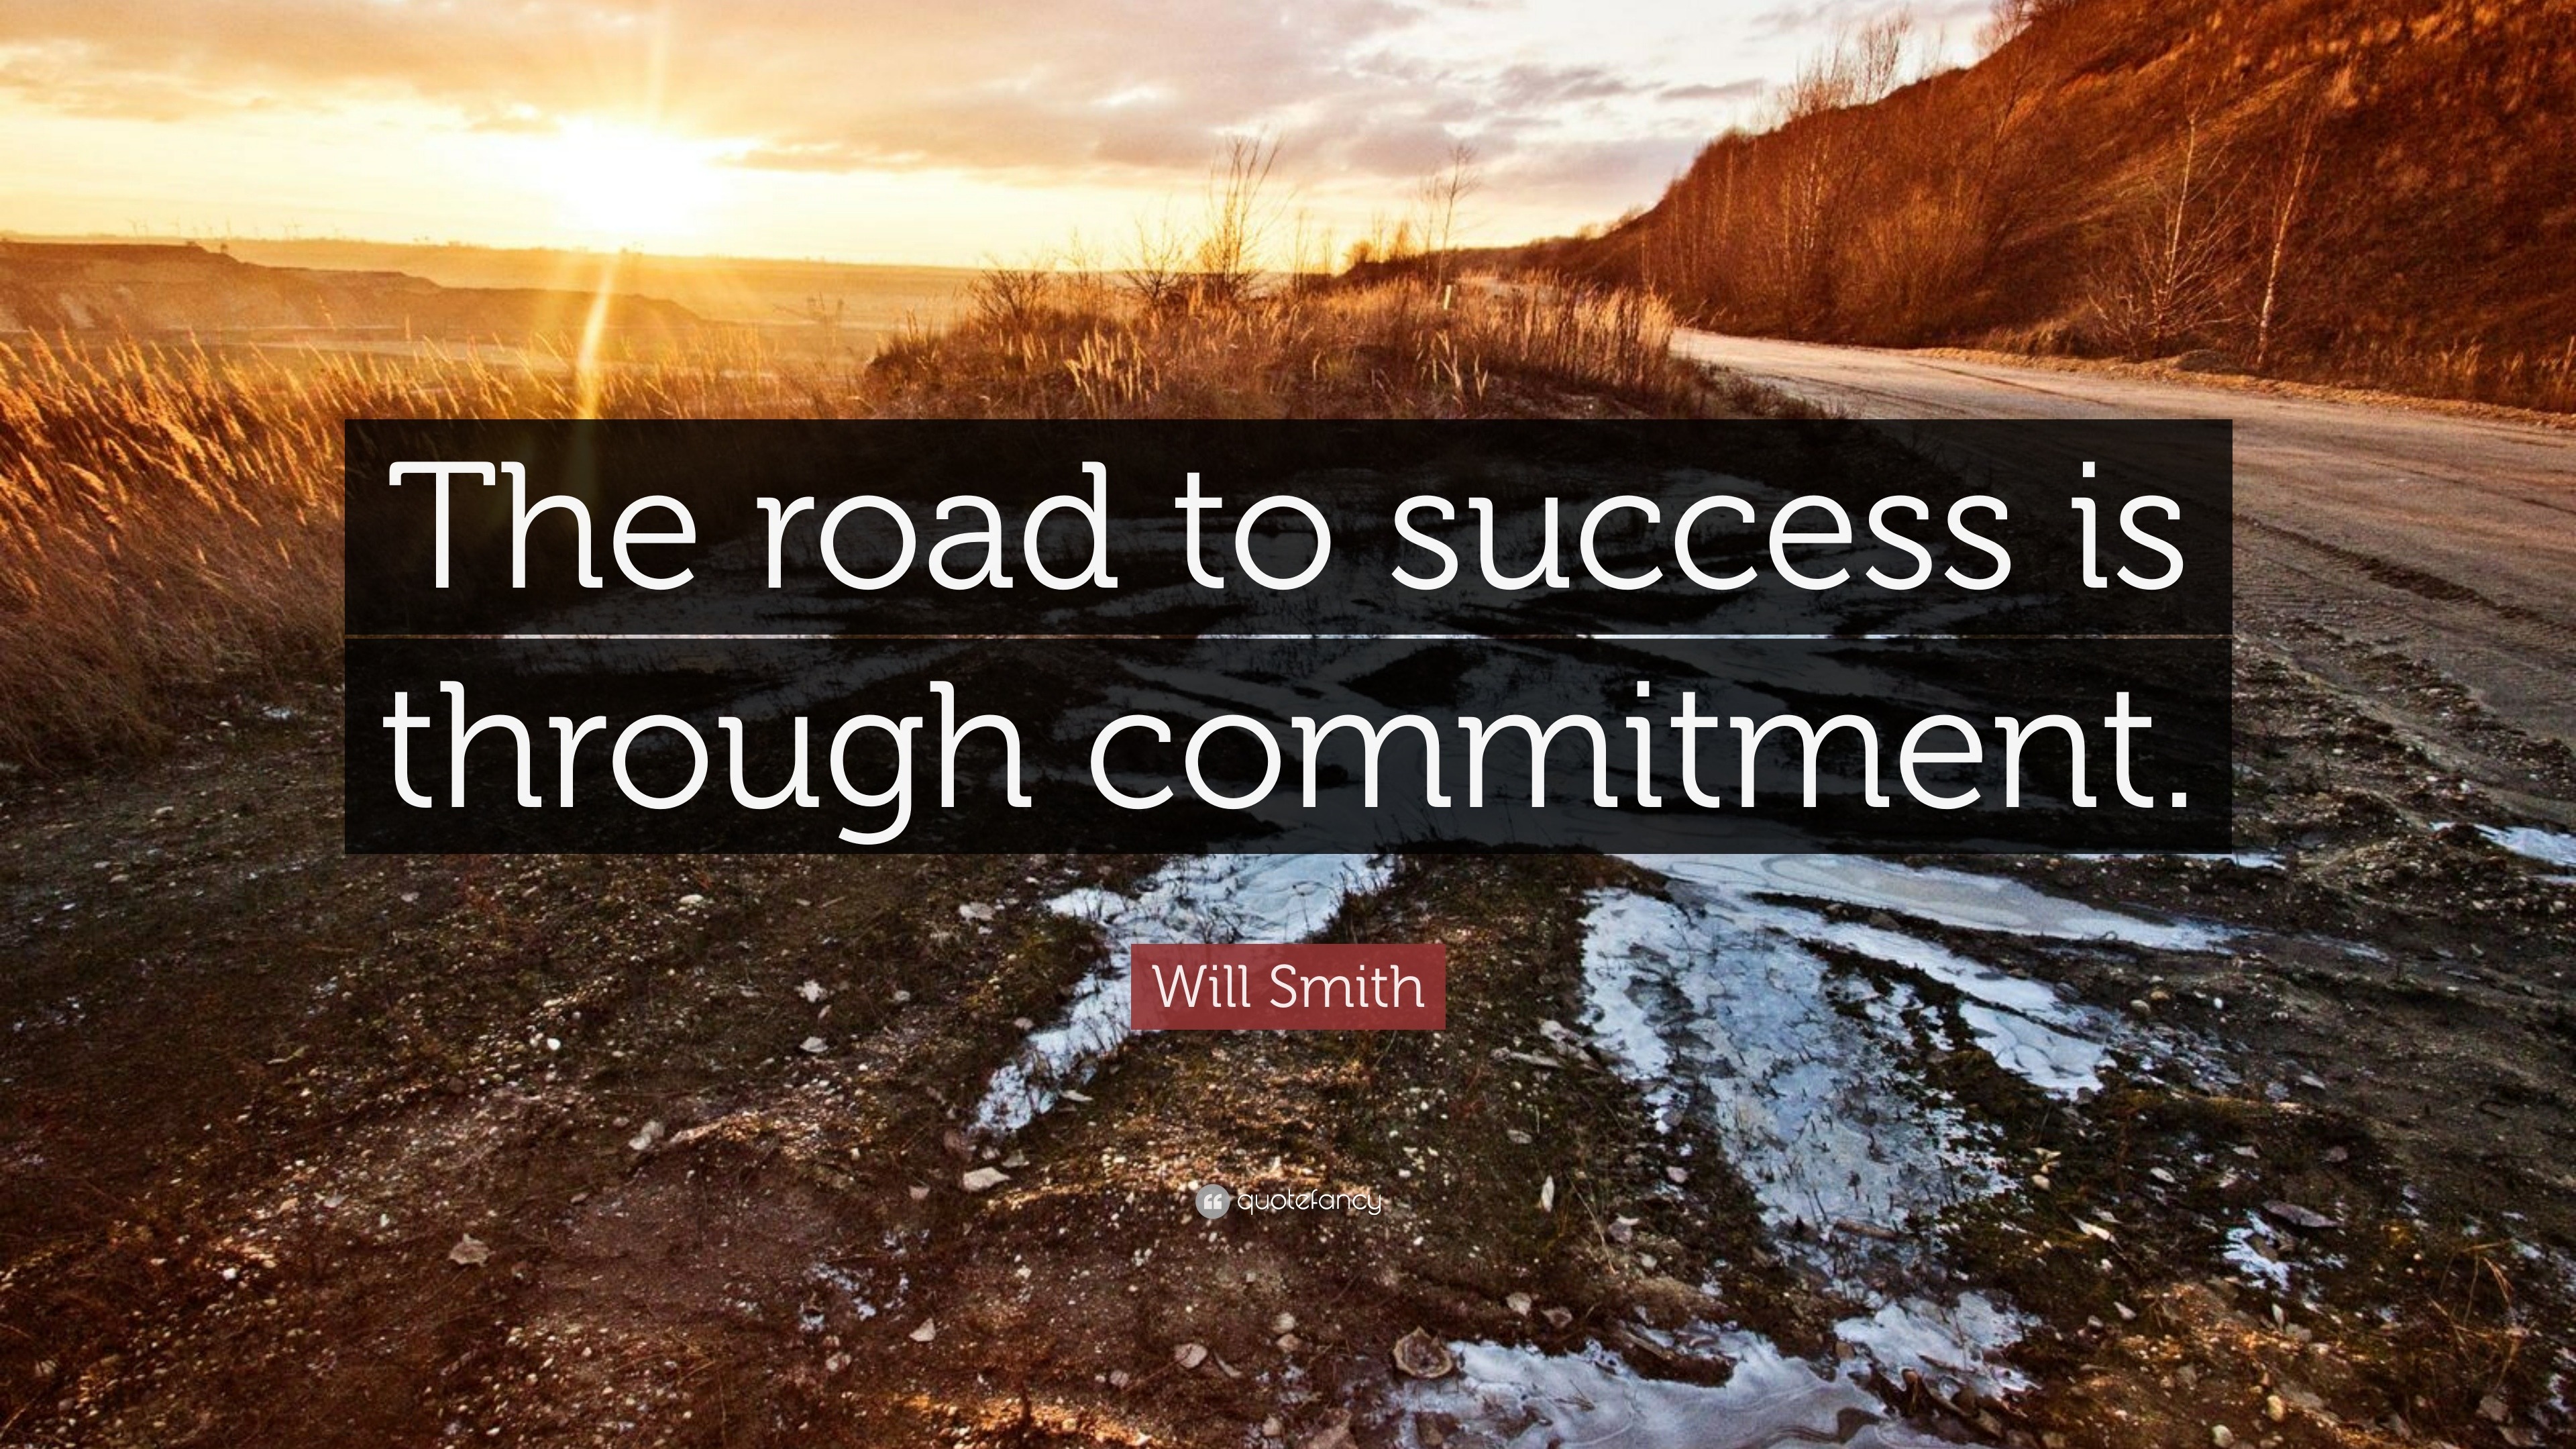 Will Smith Quote: “The road to success is through commitment.”